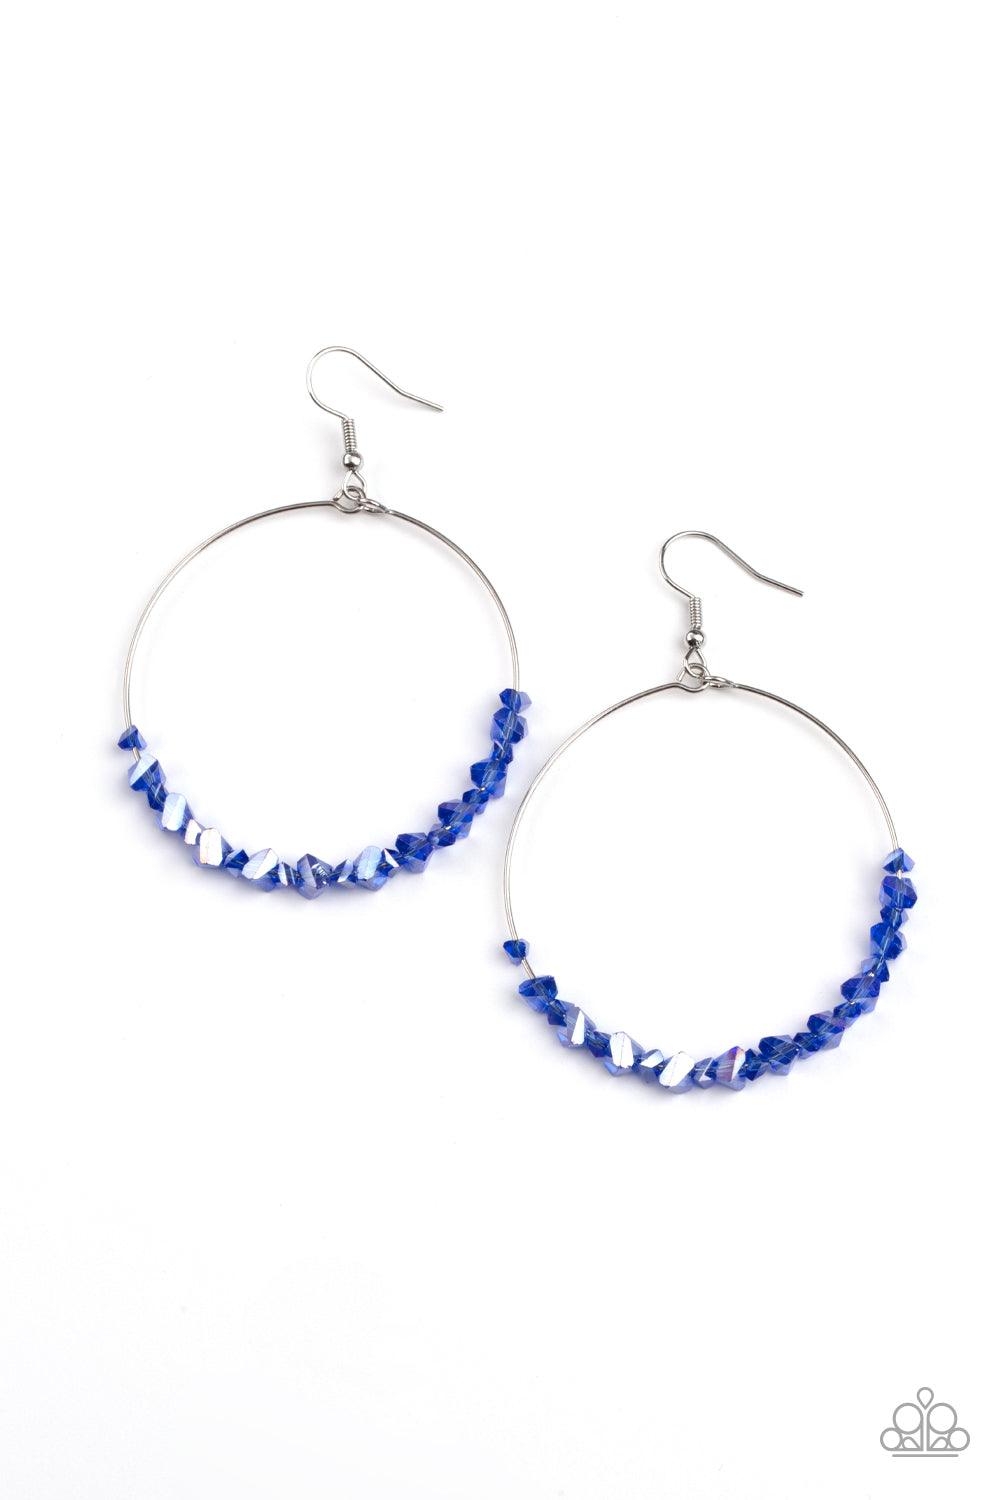 Paparazzi Accessories Glimmering Go-Getter - Blue Featuring an iridescent shimmer, jagged bits of glassy blue rocks are threaded along the bottom of a dainty silver hoop for a colorful look. Earring attaches to a standard fishhook fitting. Sold as one pai